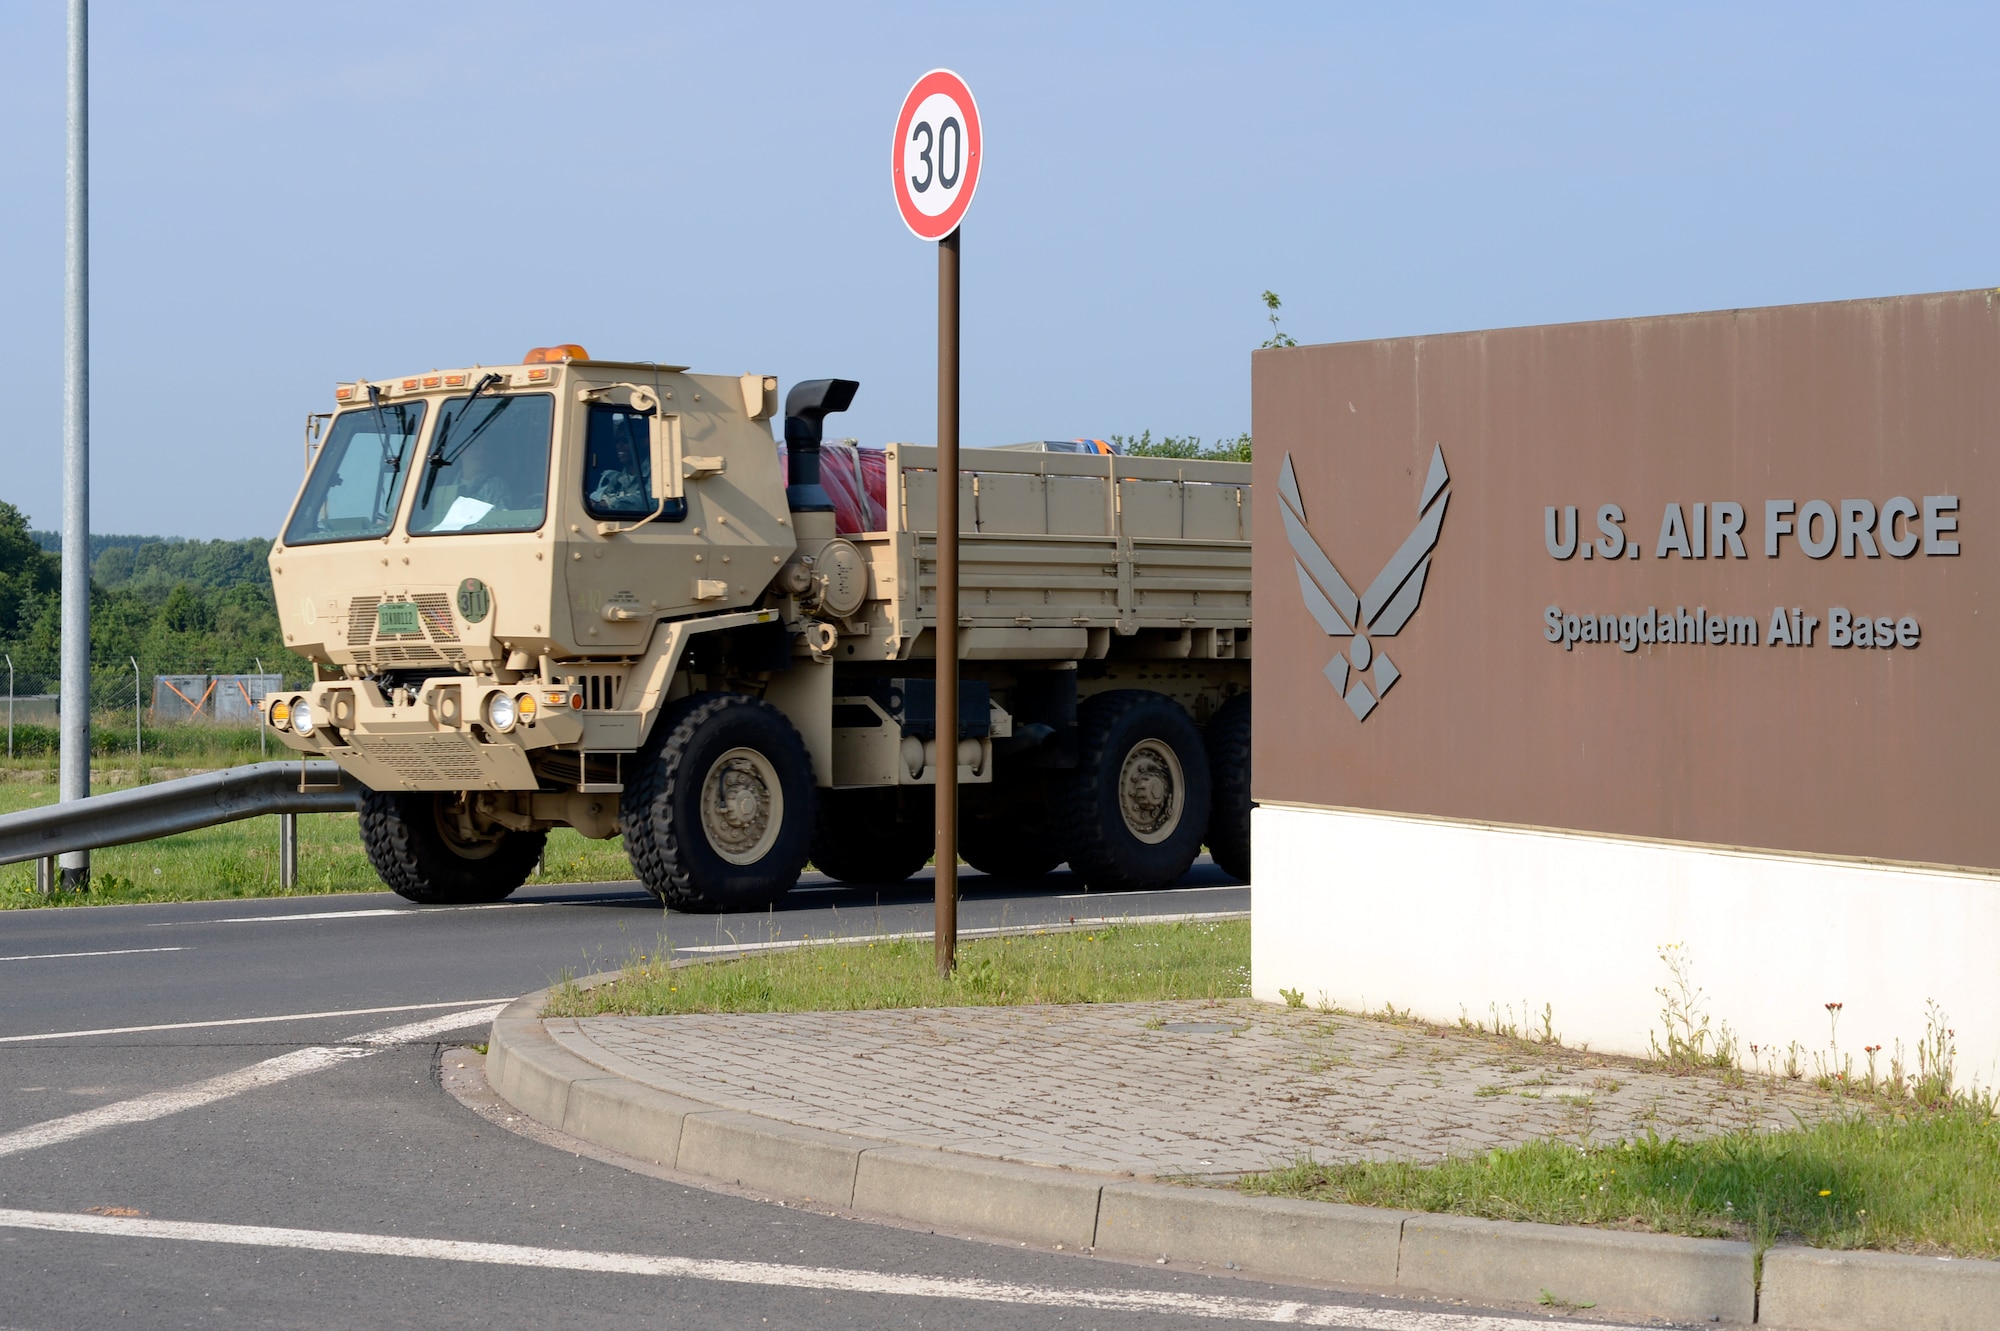 A 606th Air Control Squadron convoy departs Spangdahlem Air Base, Germany, June 2, 2014, to U.S. Air Force Aviation Detachment, Poland, for a planned aviation rotation. The 606th ACS will provide communication support to the 480th Fighter Squadron during their time in Poland. (U.S. Air Force photo by Staff Sgt. Christopher Ruano/Released)